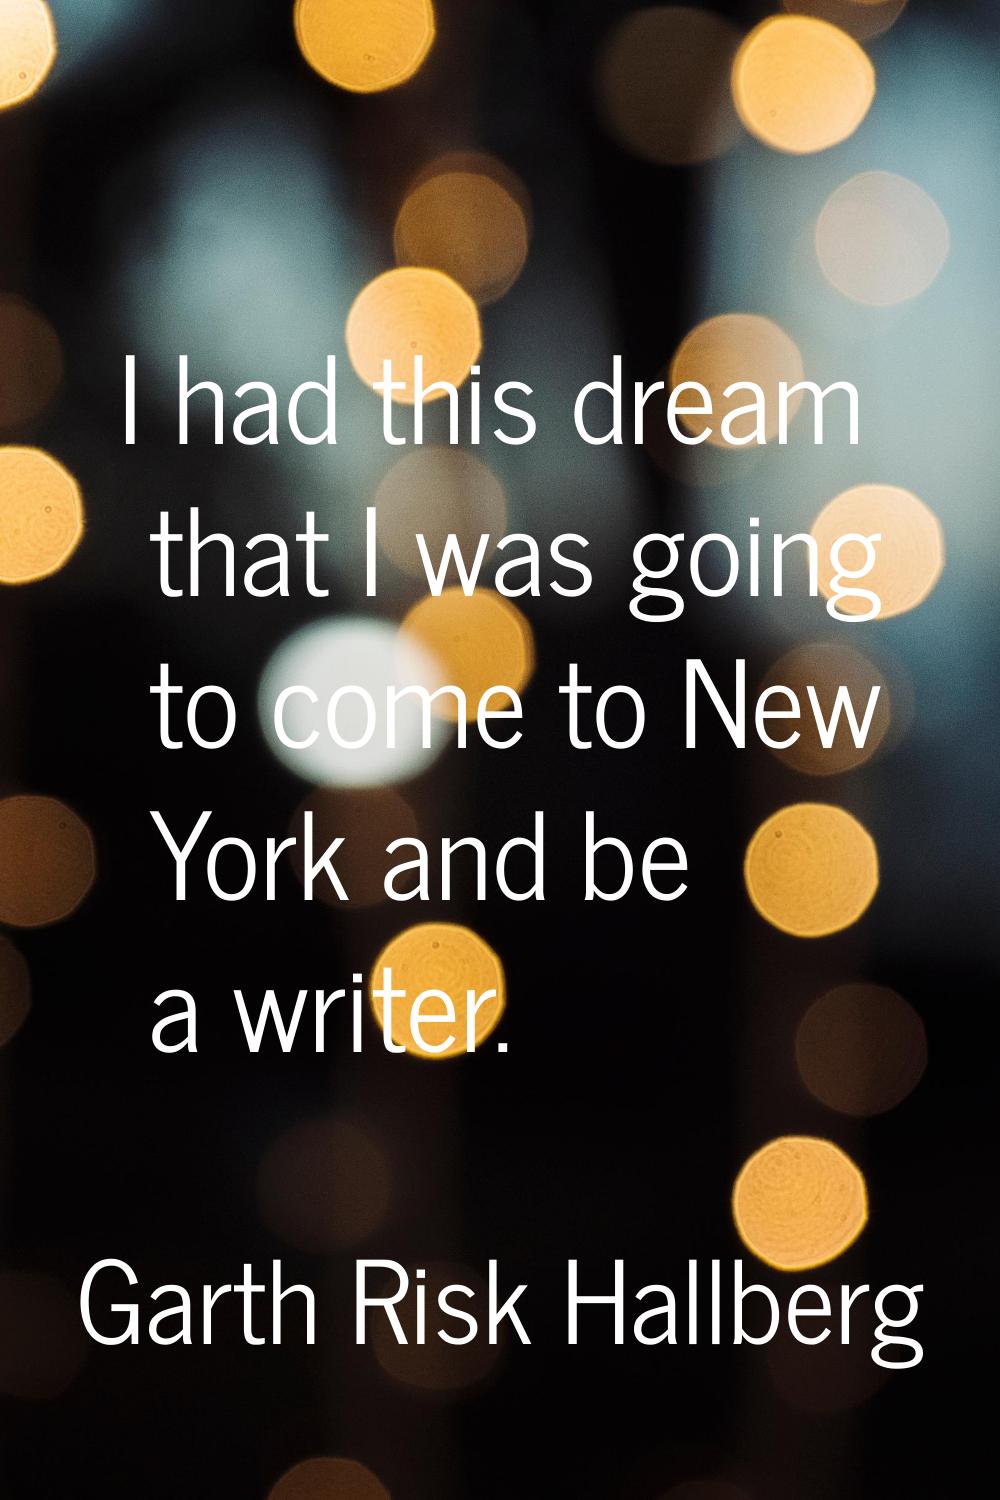 I had this dream that I was going to come to New York and be a writer.